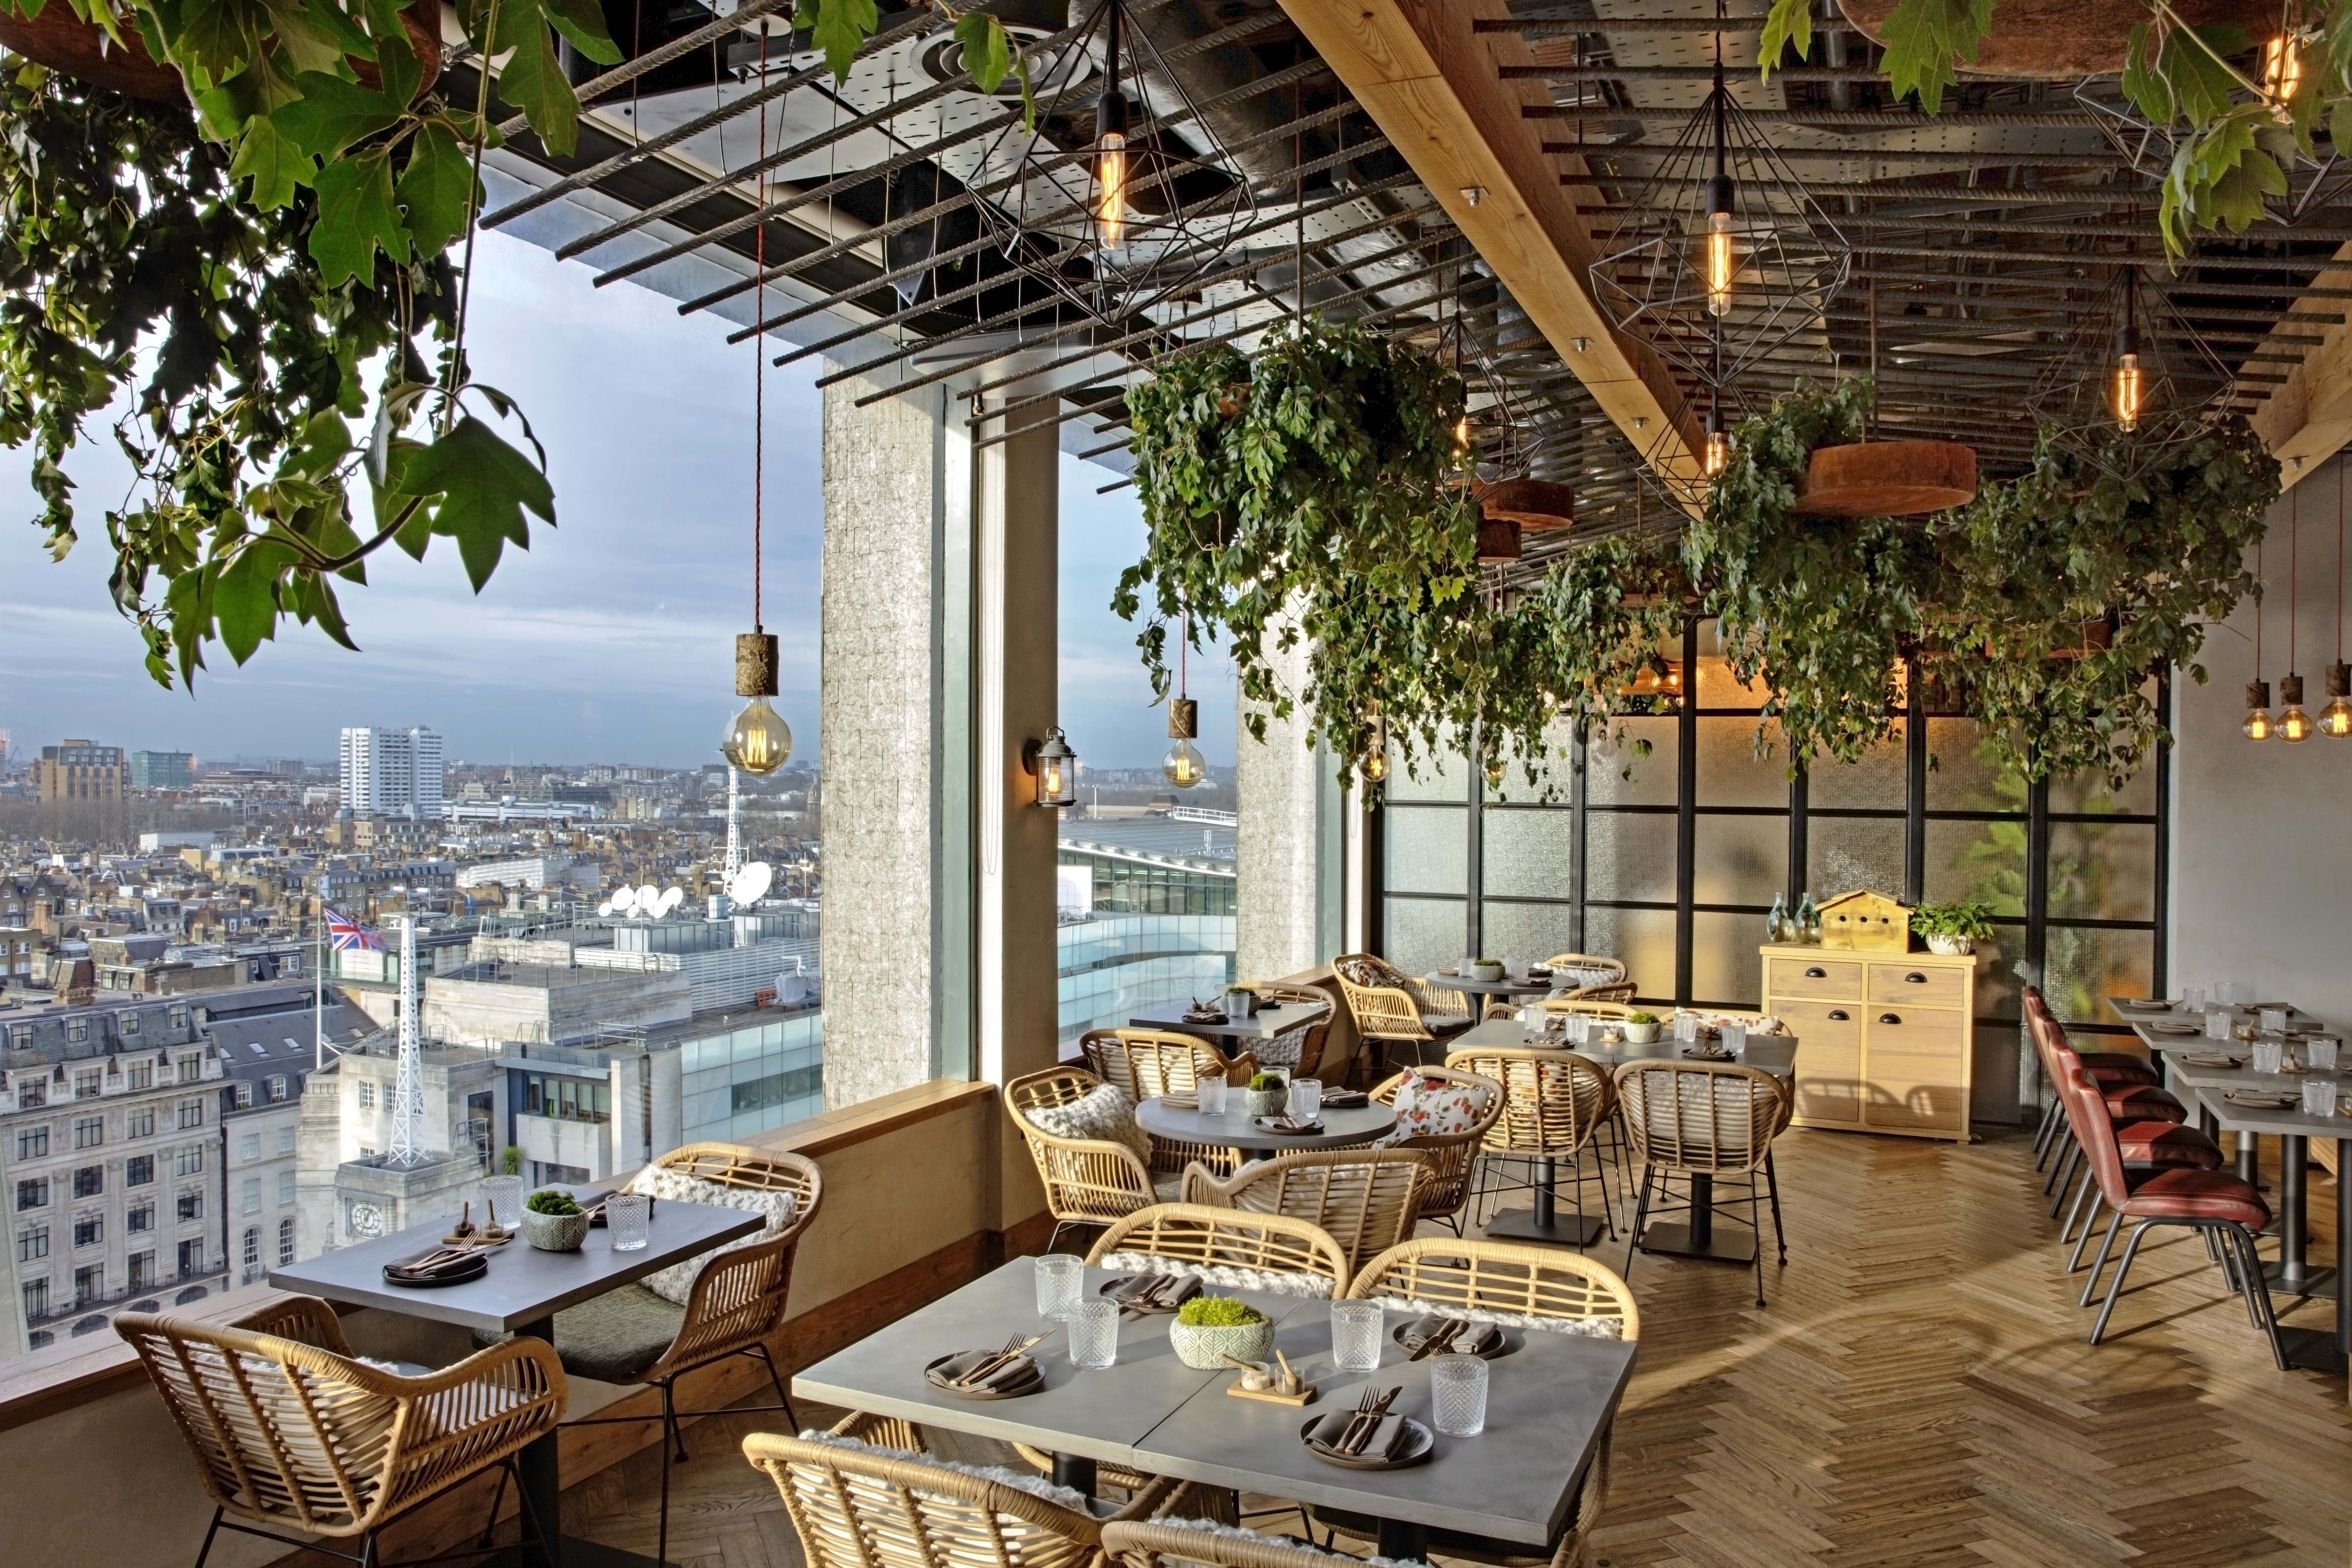 Treehouse Hotel London – Cool hotels